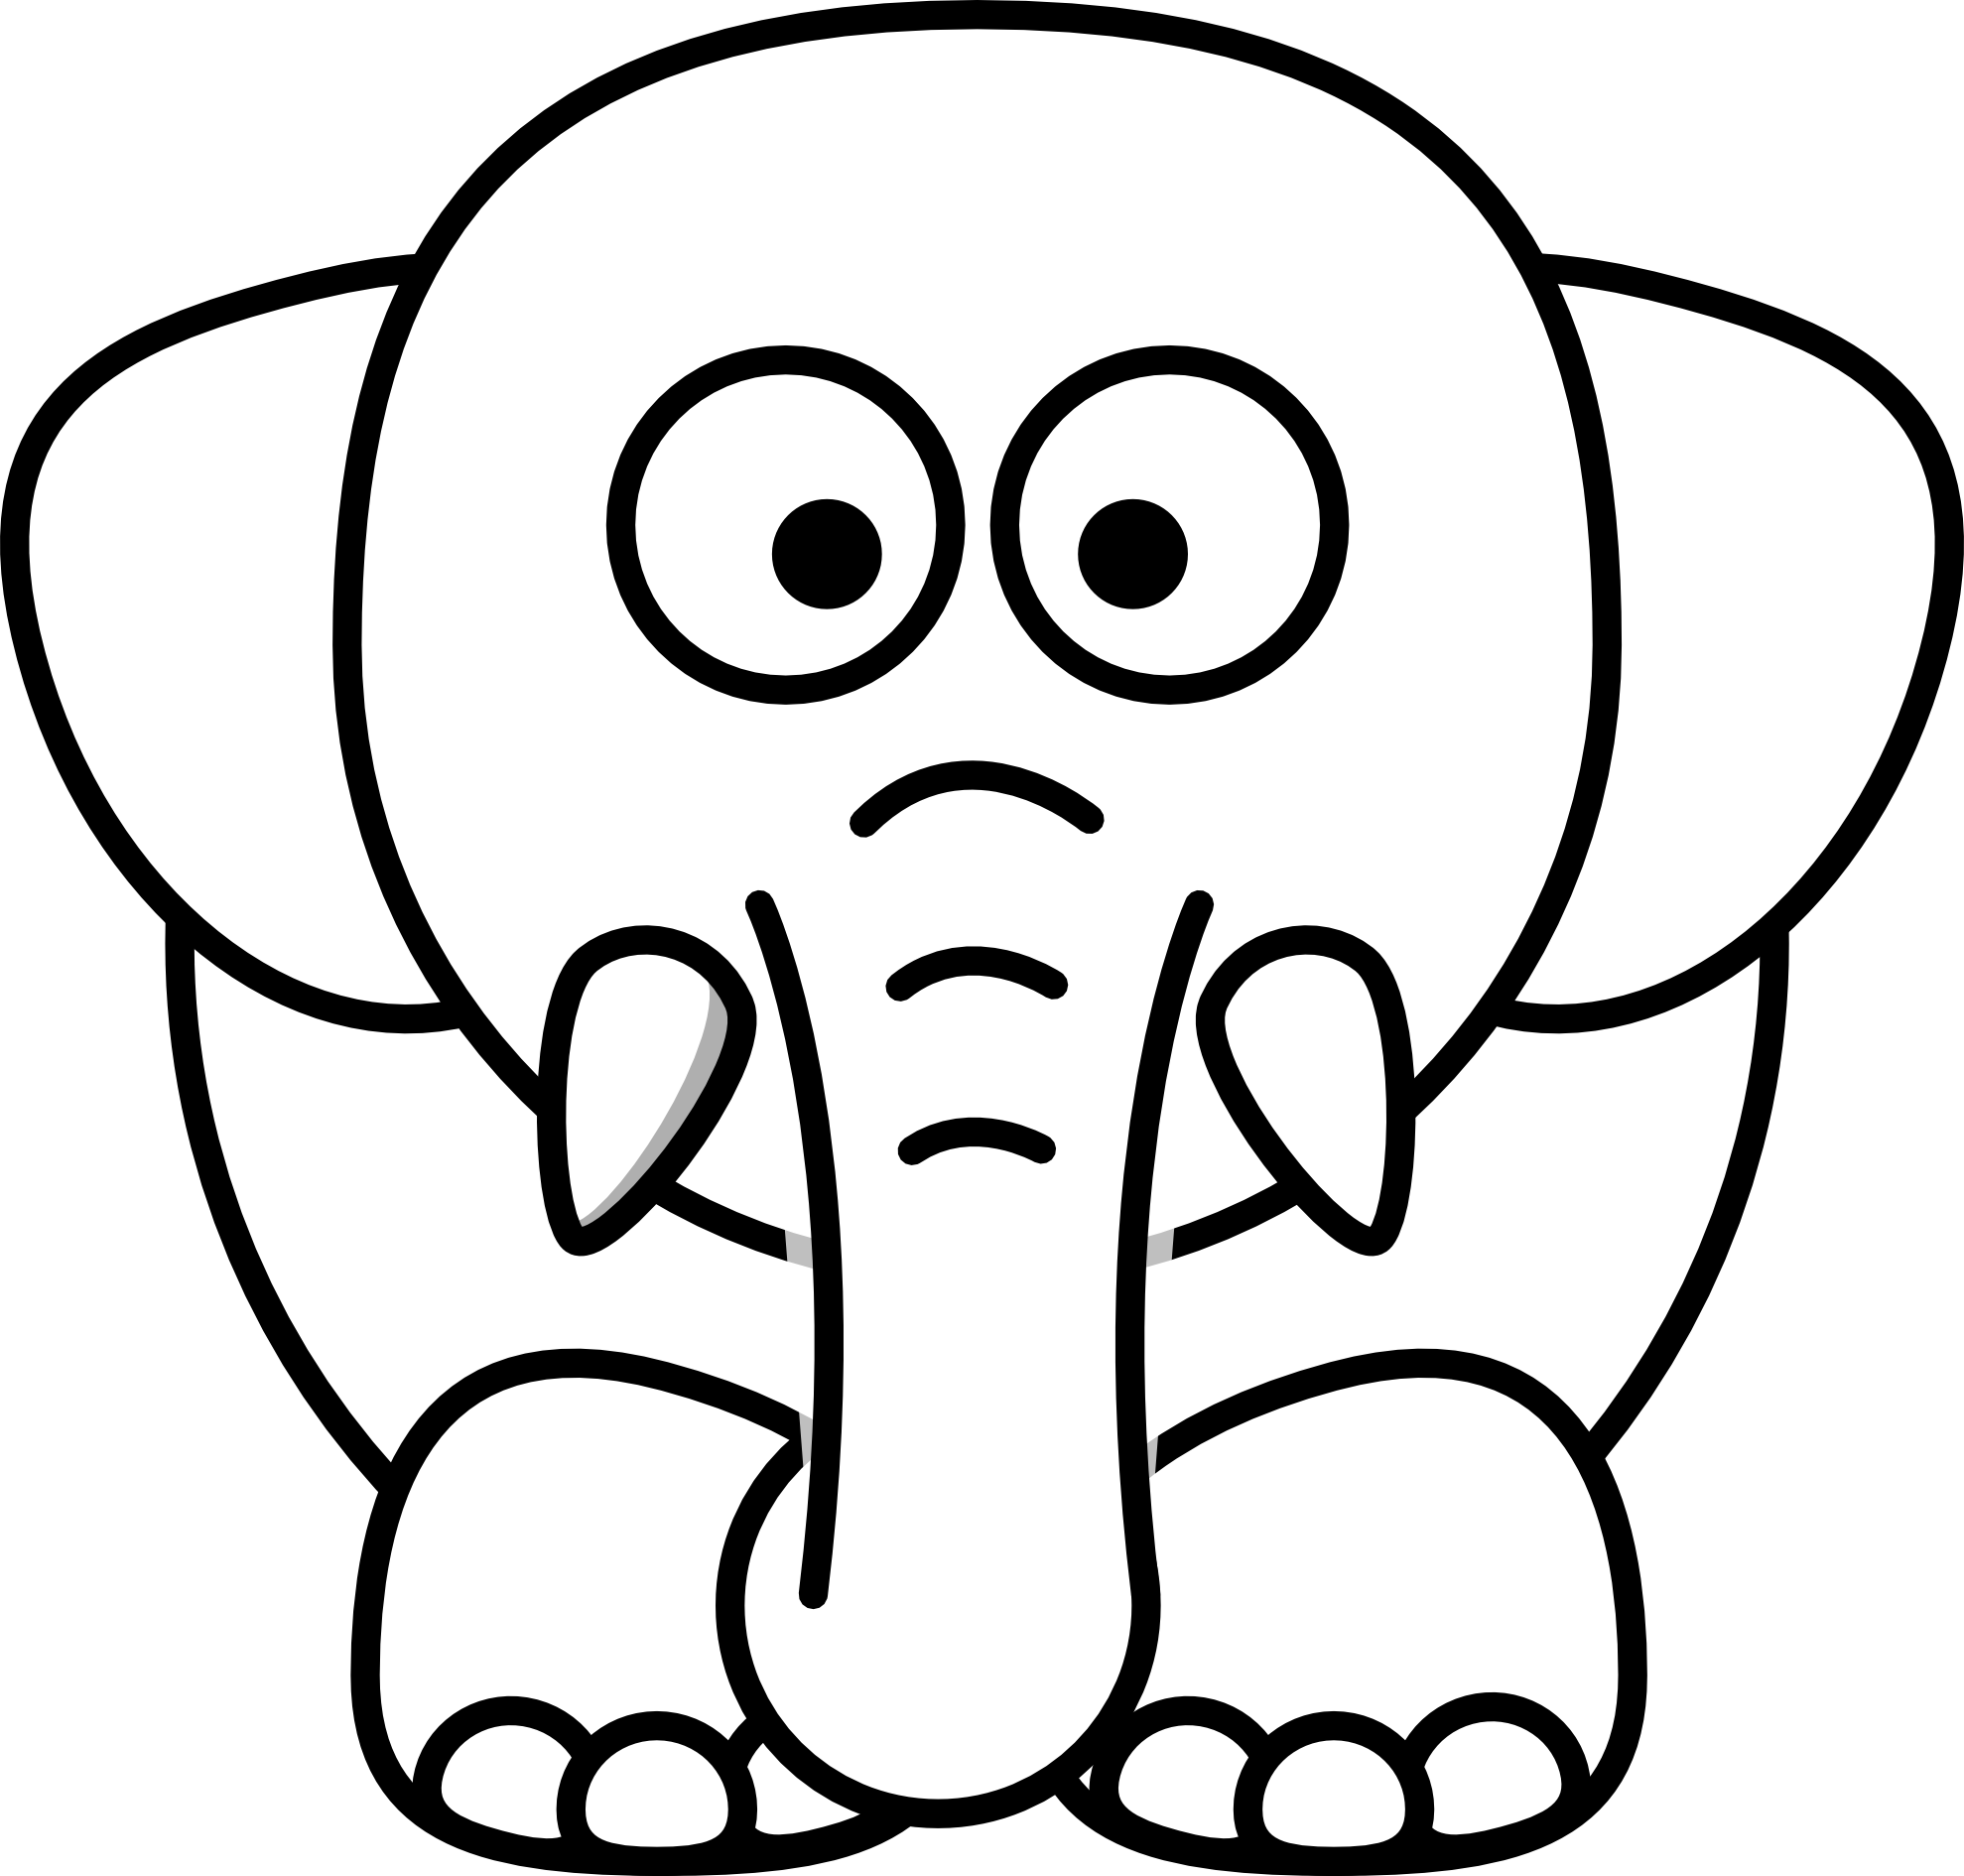 Free Pictures Of Cartoon Elephants, Download Free Pictures Of Cartoon